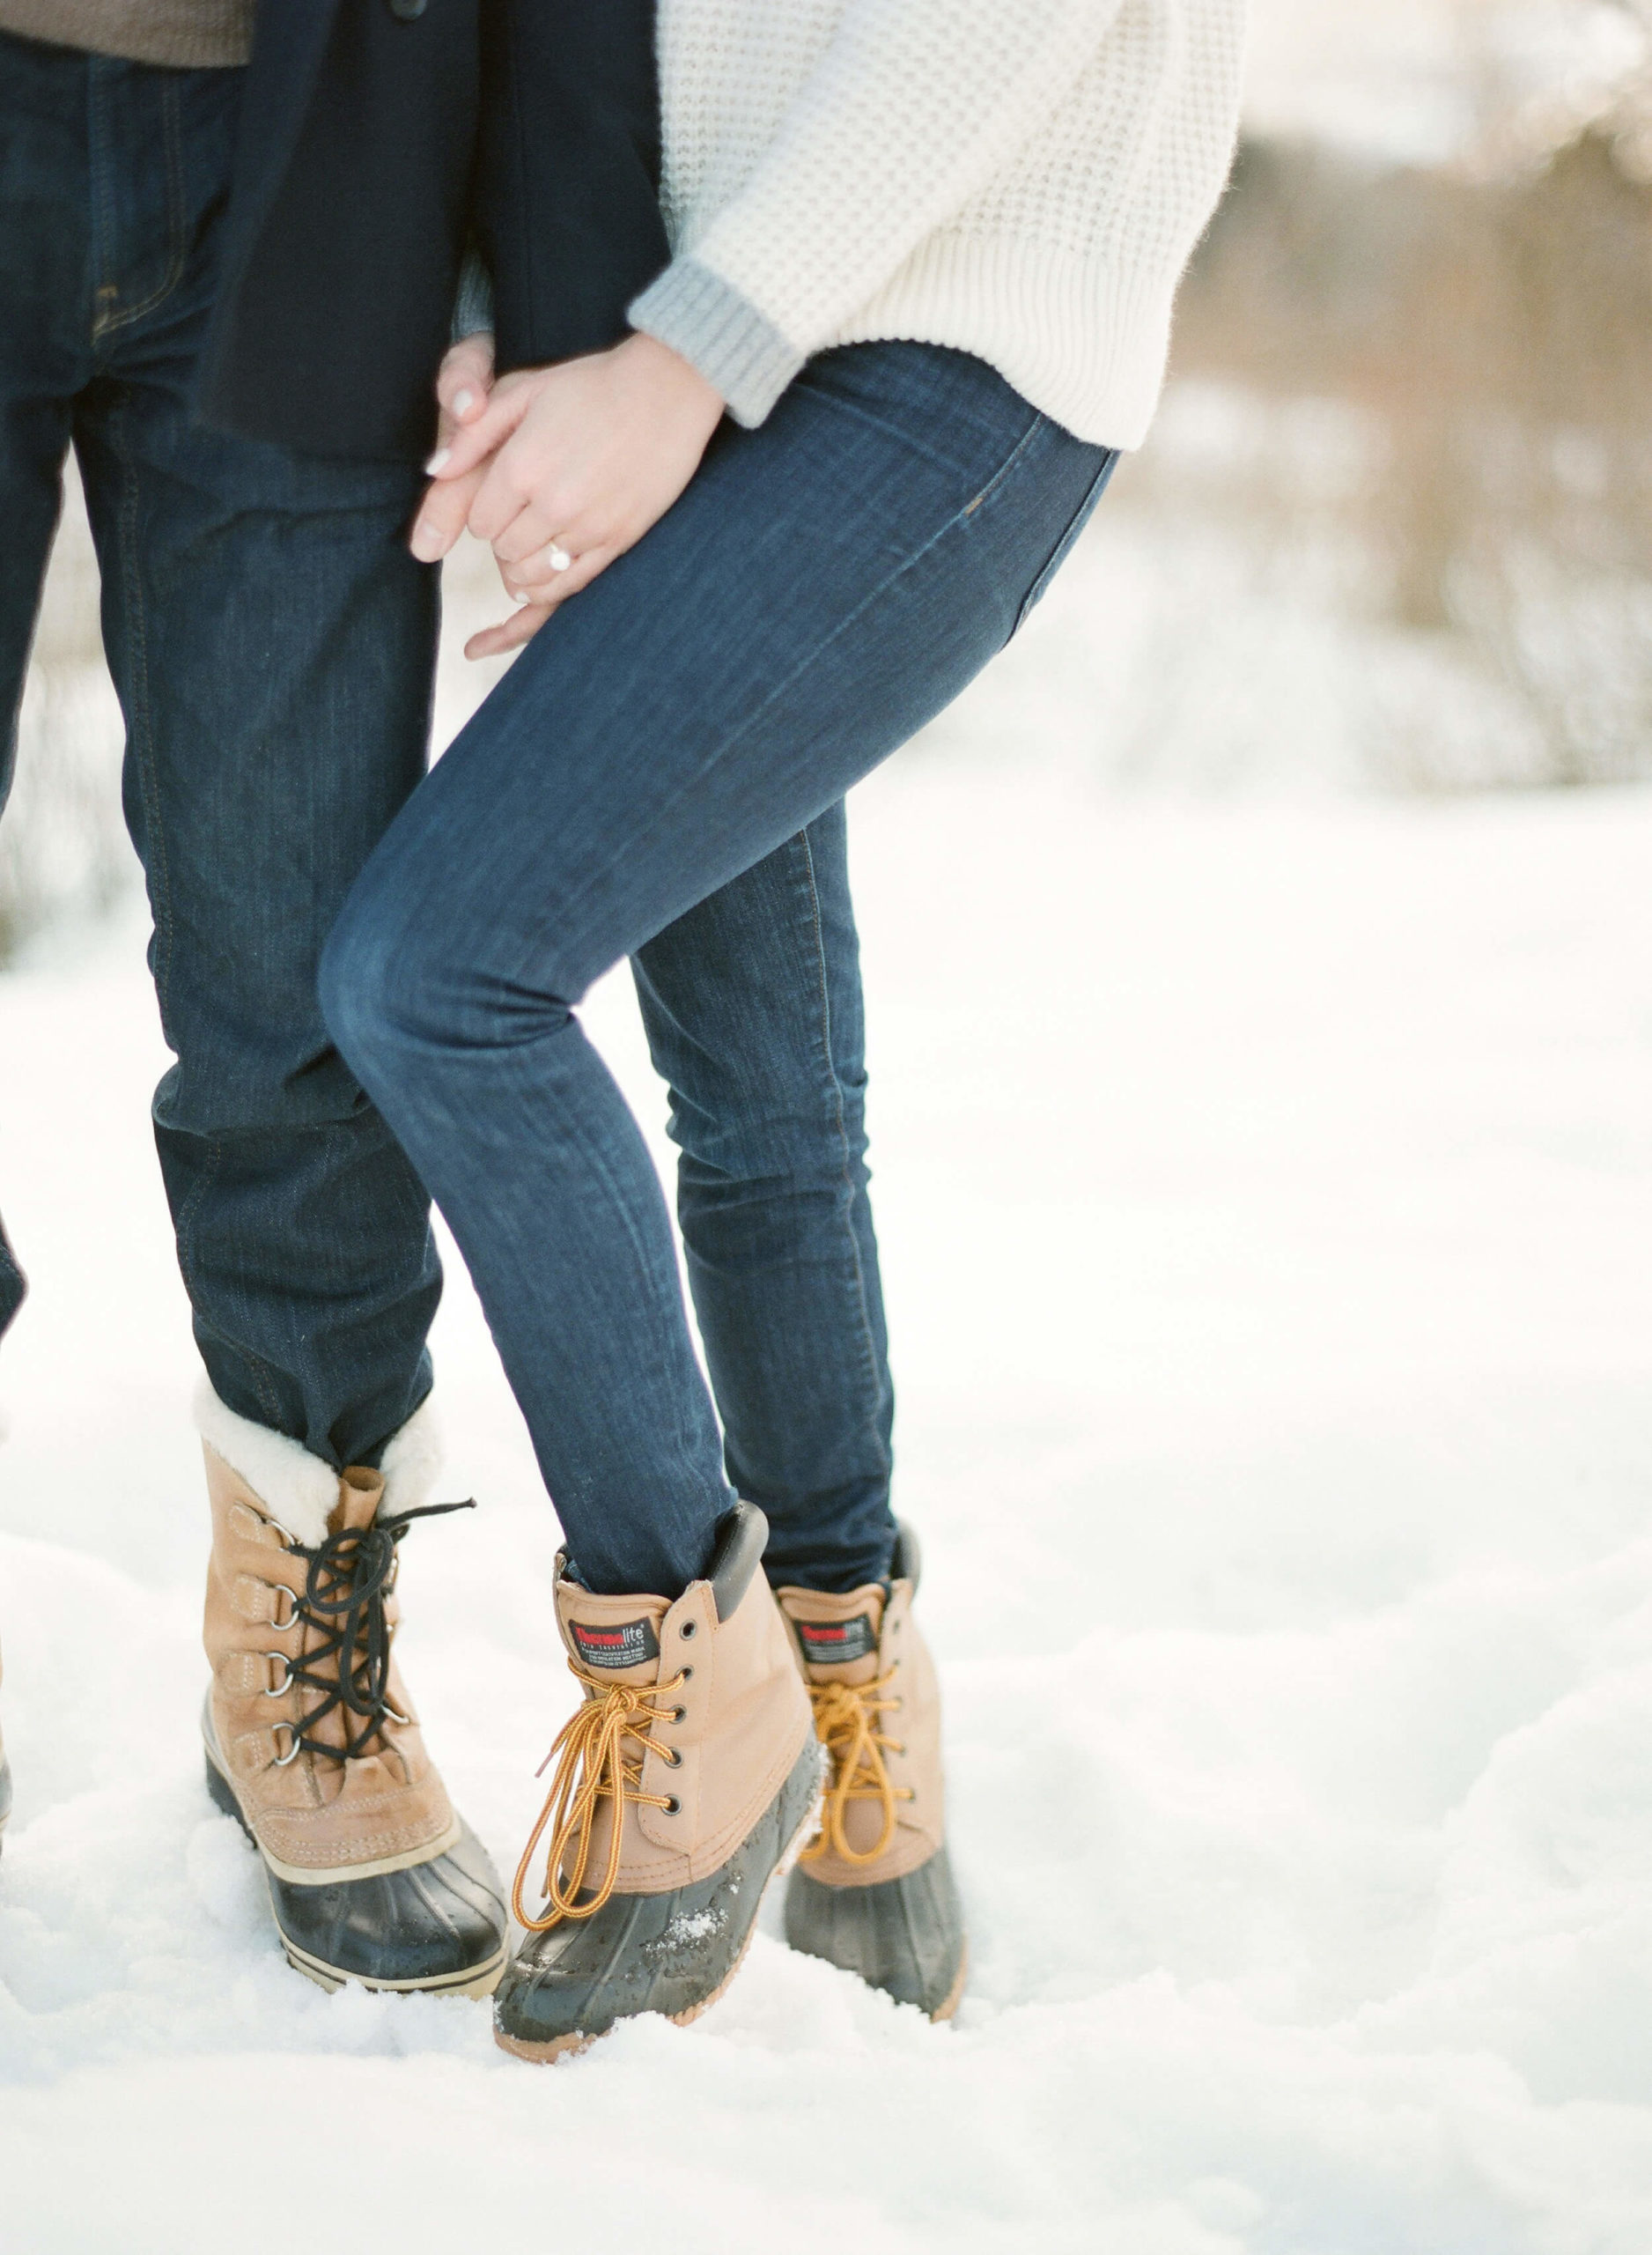 couple holding hands in winter photoshoot